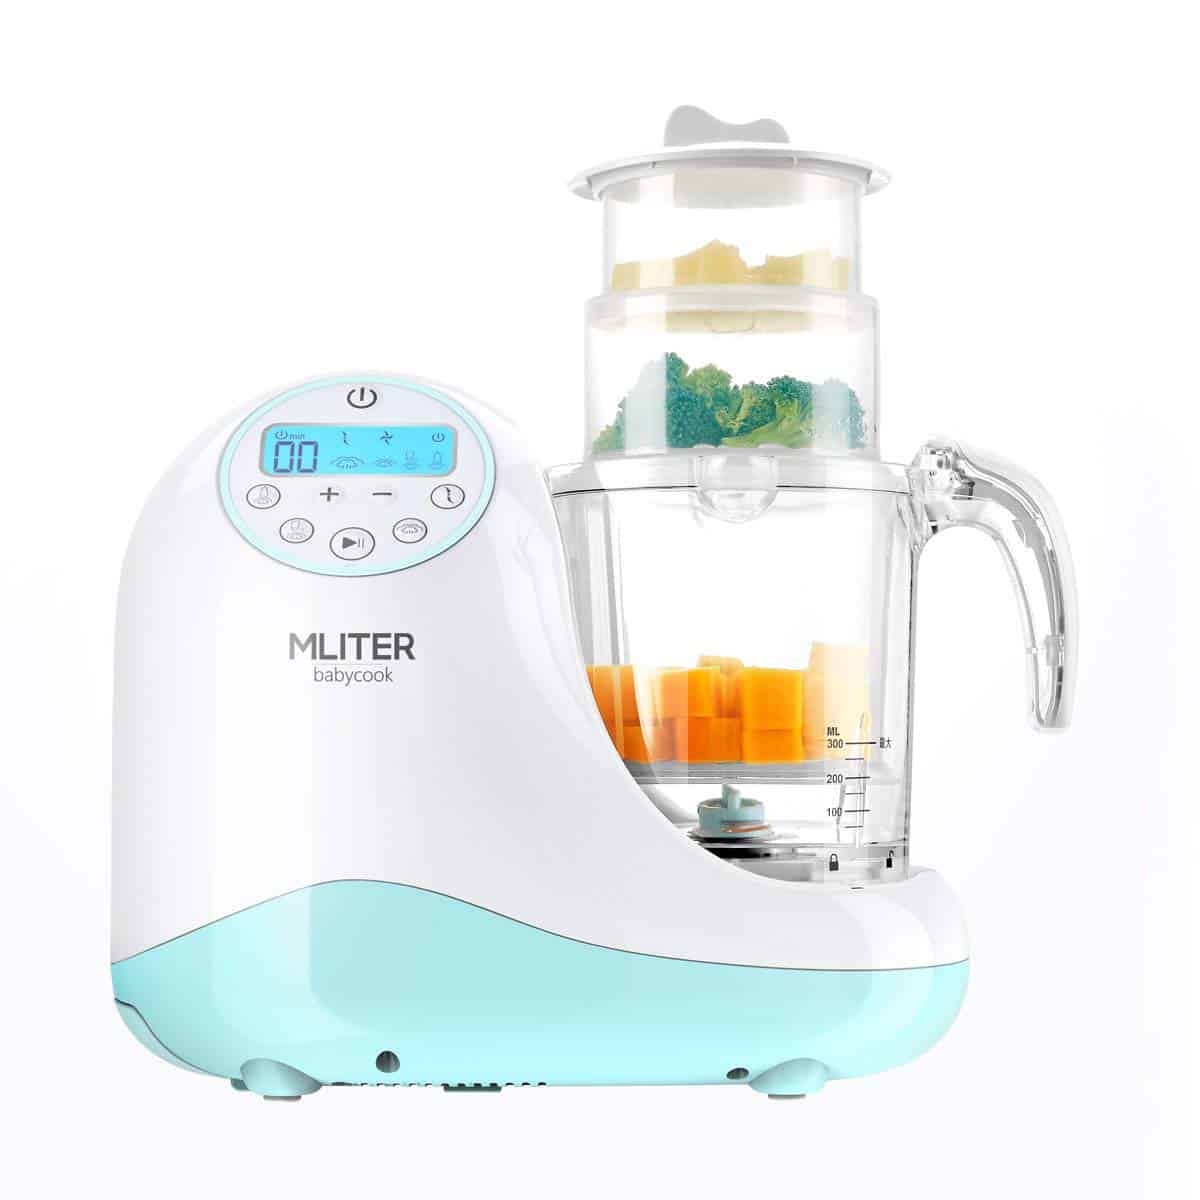 Top 10 Best Baby Food Maker and Steam Cookers in 2022 - Best Reviews